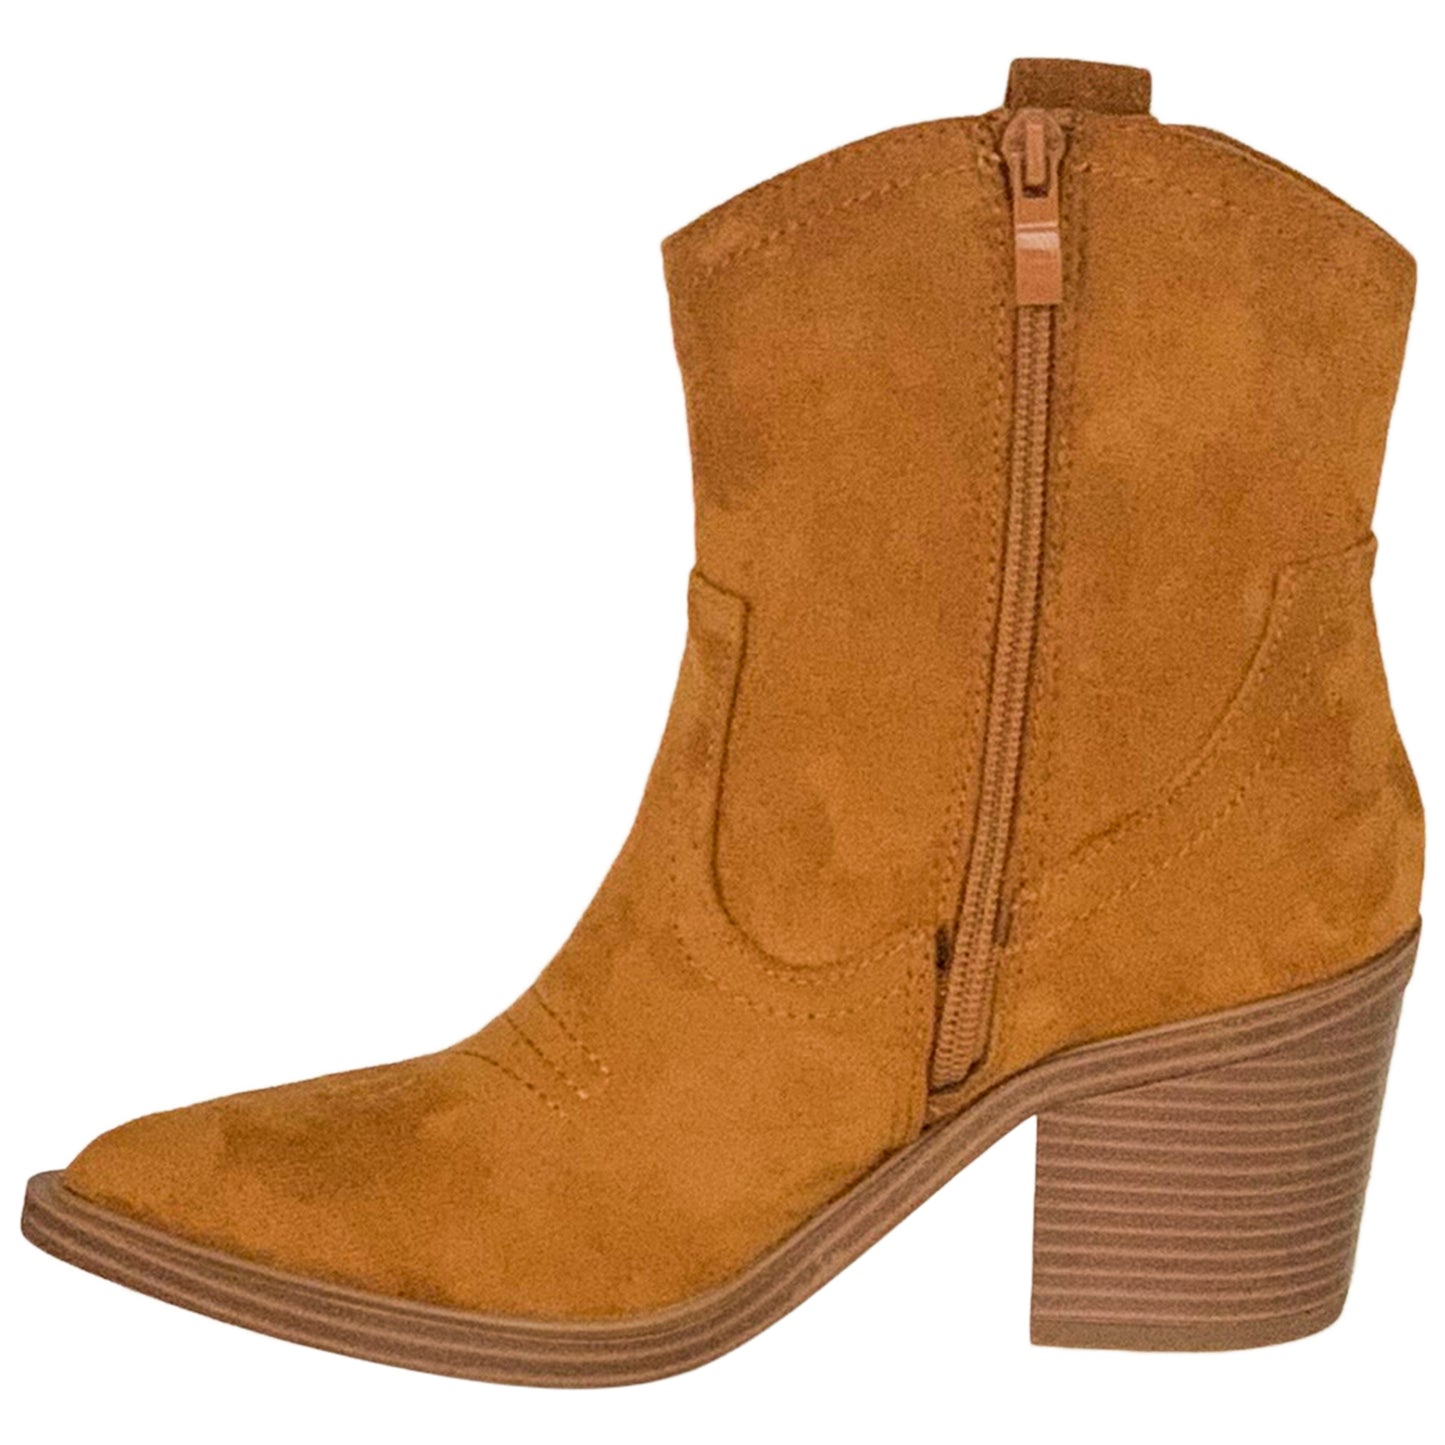 Western Ankle Booties Stitched Cowboy Toe Side Zipper Closure Tan